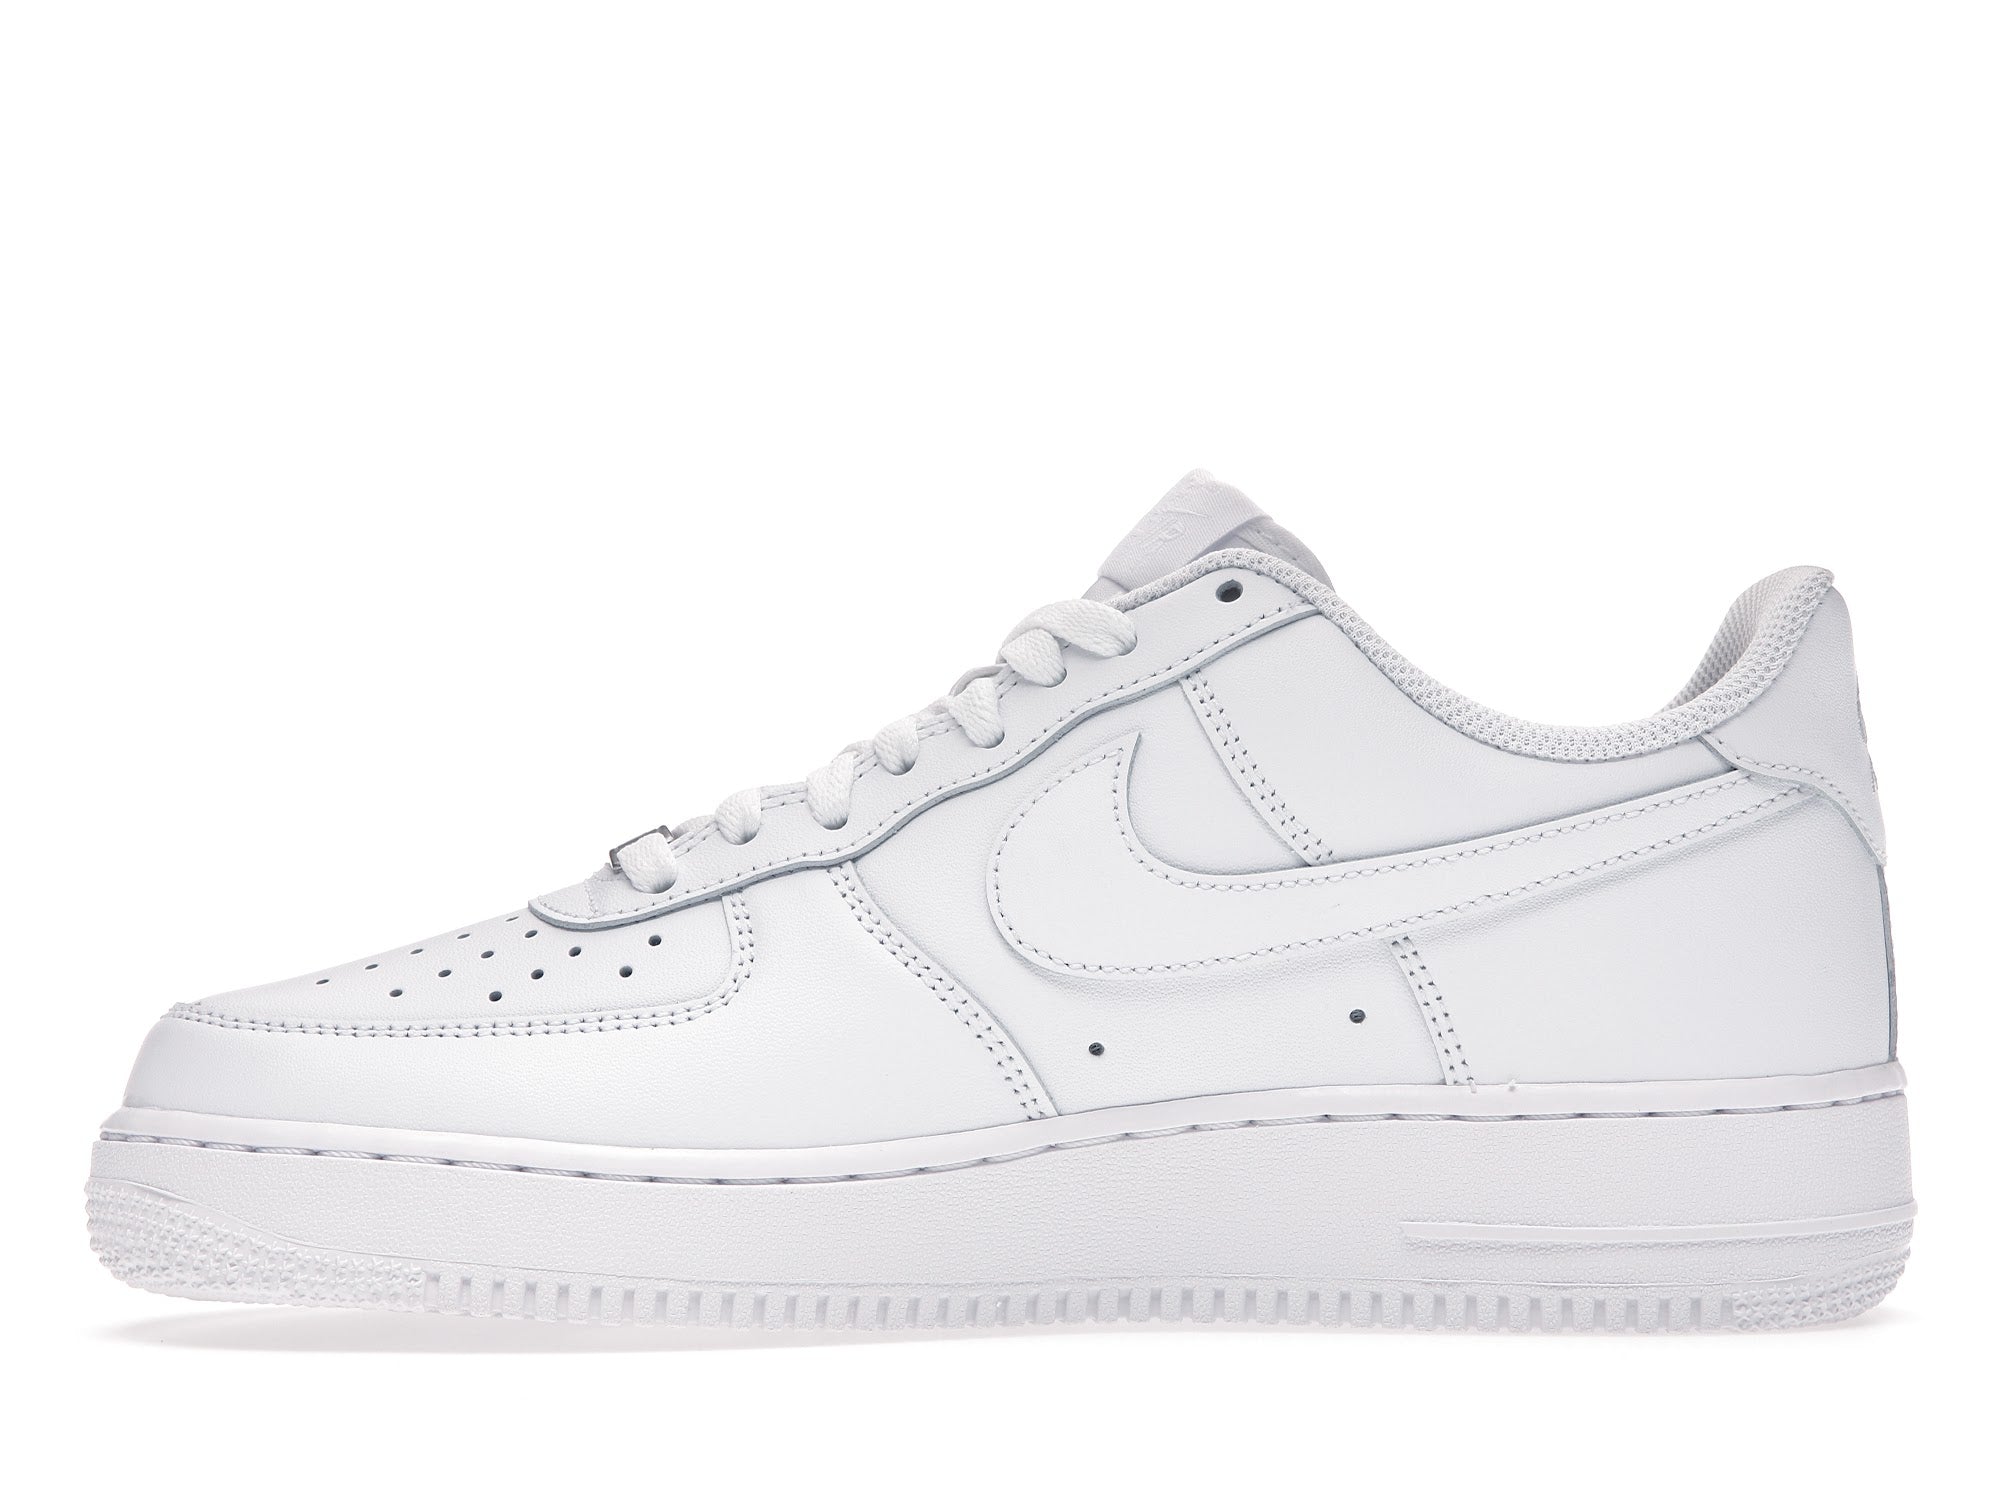 Nike Air Force 1 Low '07 Utility US Size 4.5Y/ W Size 6, White/Black, With Box